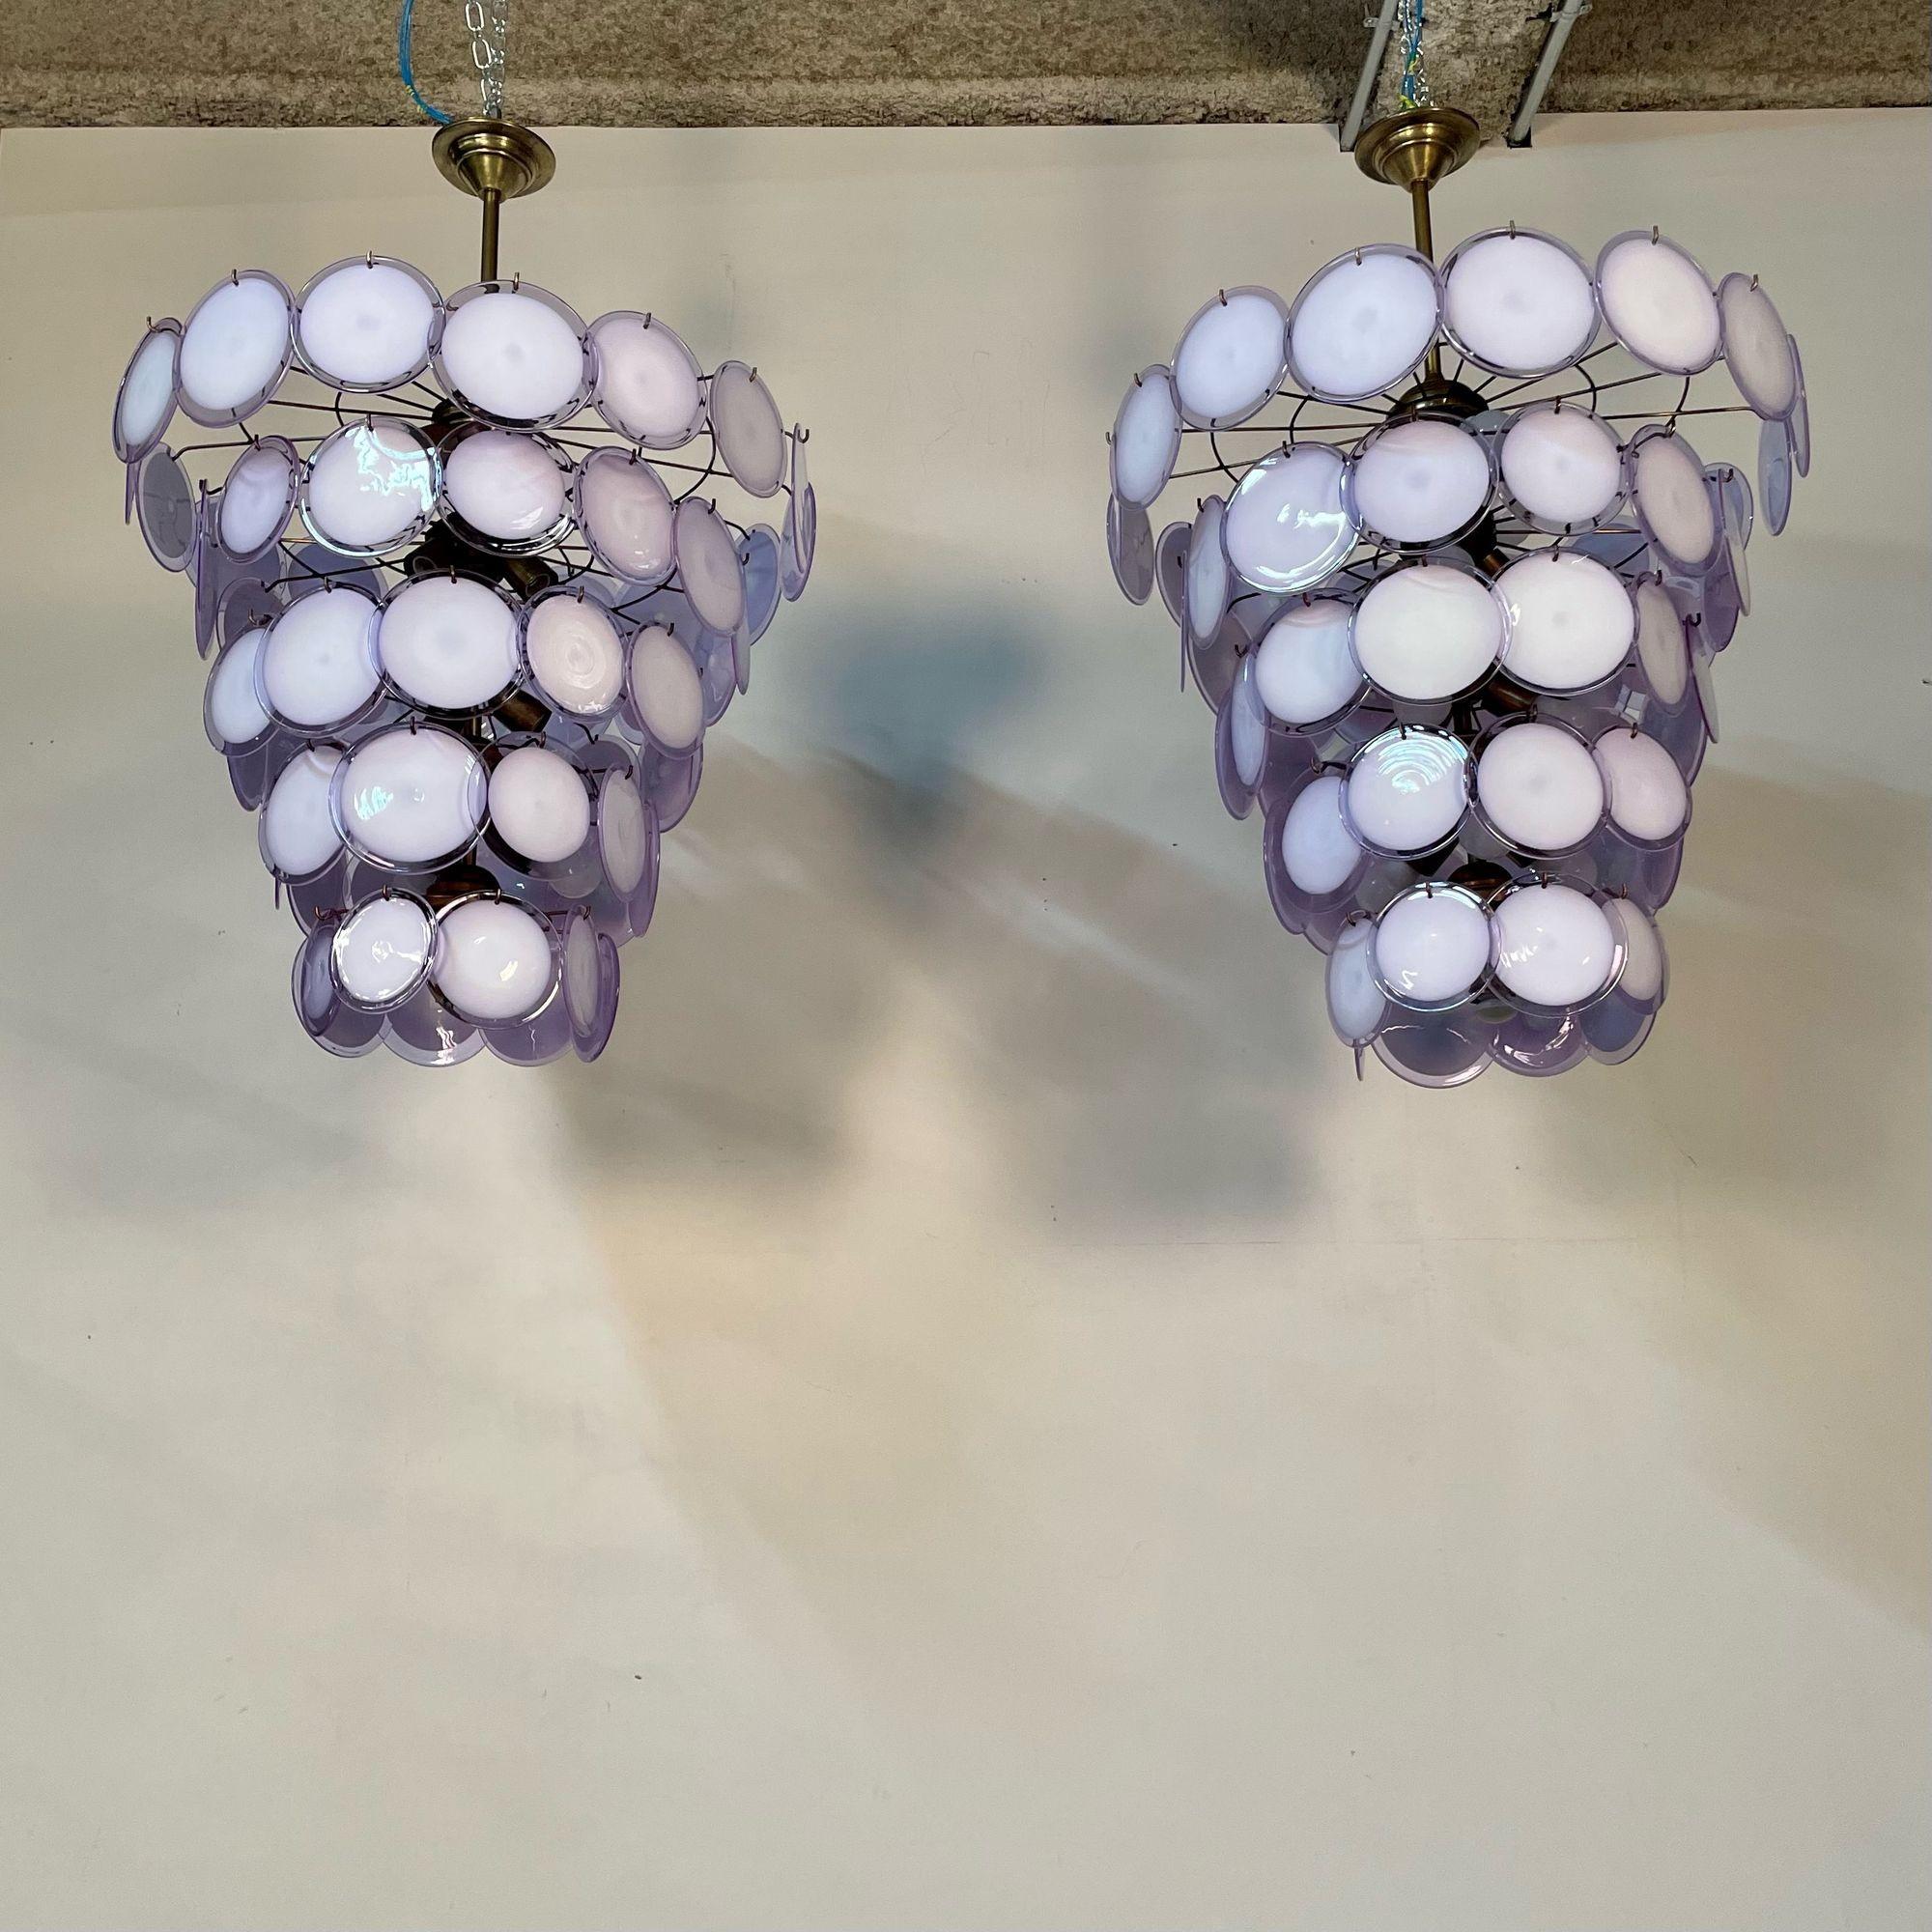 Murano Disc Mid-Century Modern Tiered Chandelier, Antiqued Brass, New Wired, Lavender and White Disk. 
 
After purchasing a small factory of circa 1950/60s Murano Discs in Italy we have started to manufacture our own 2020 frames. These frame made